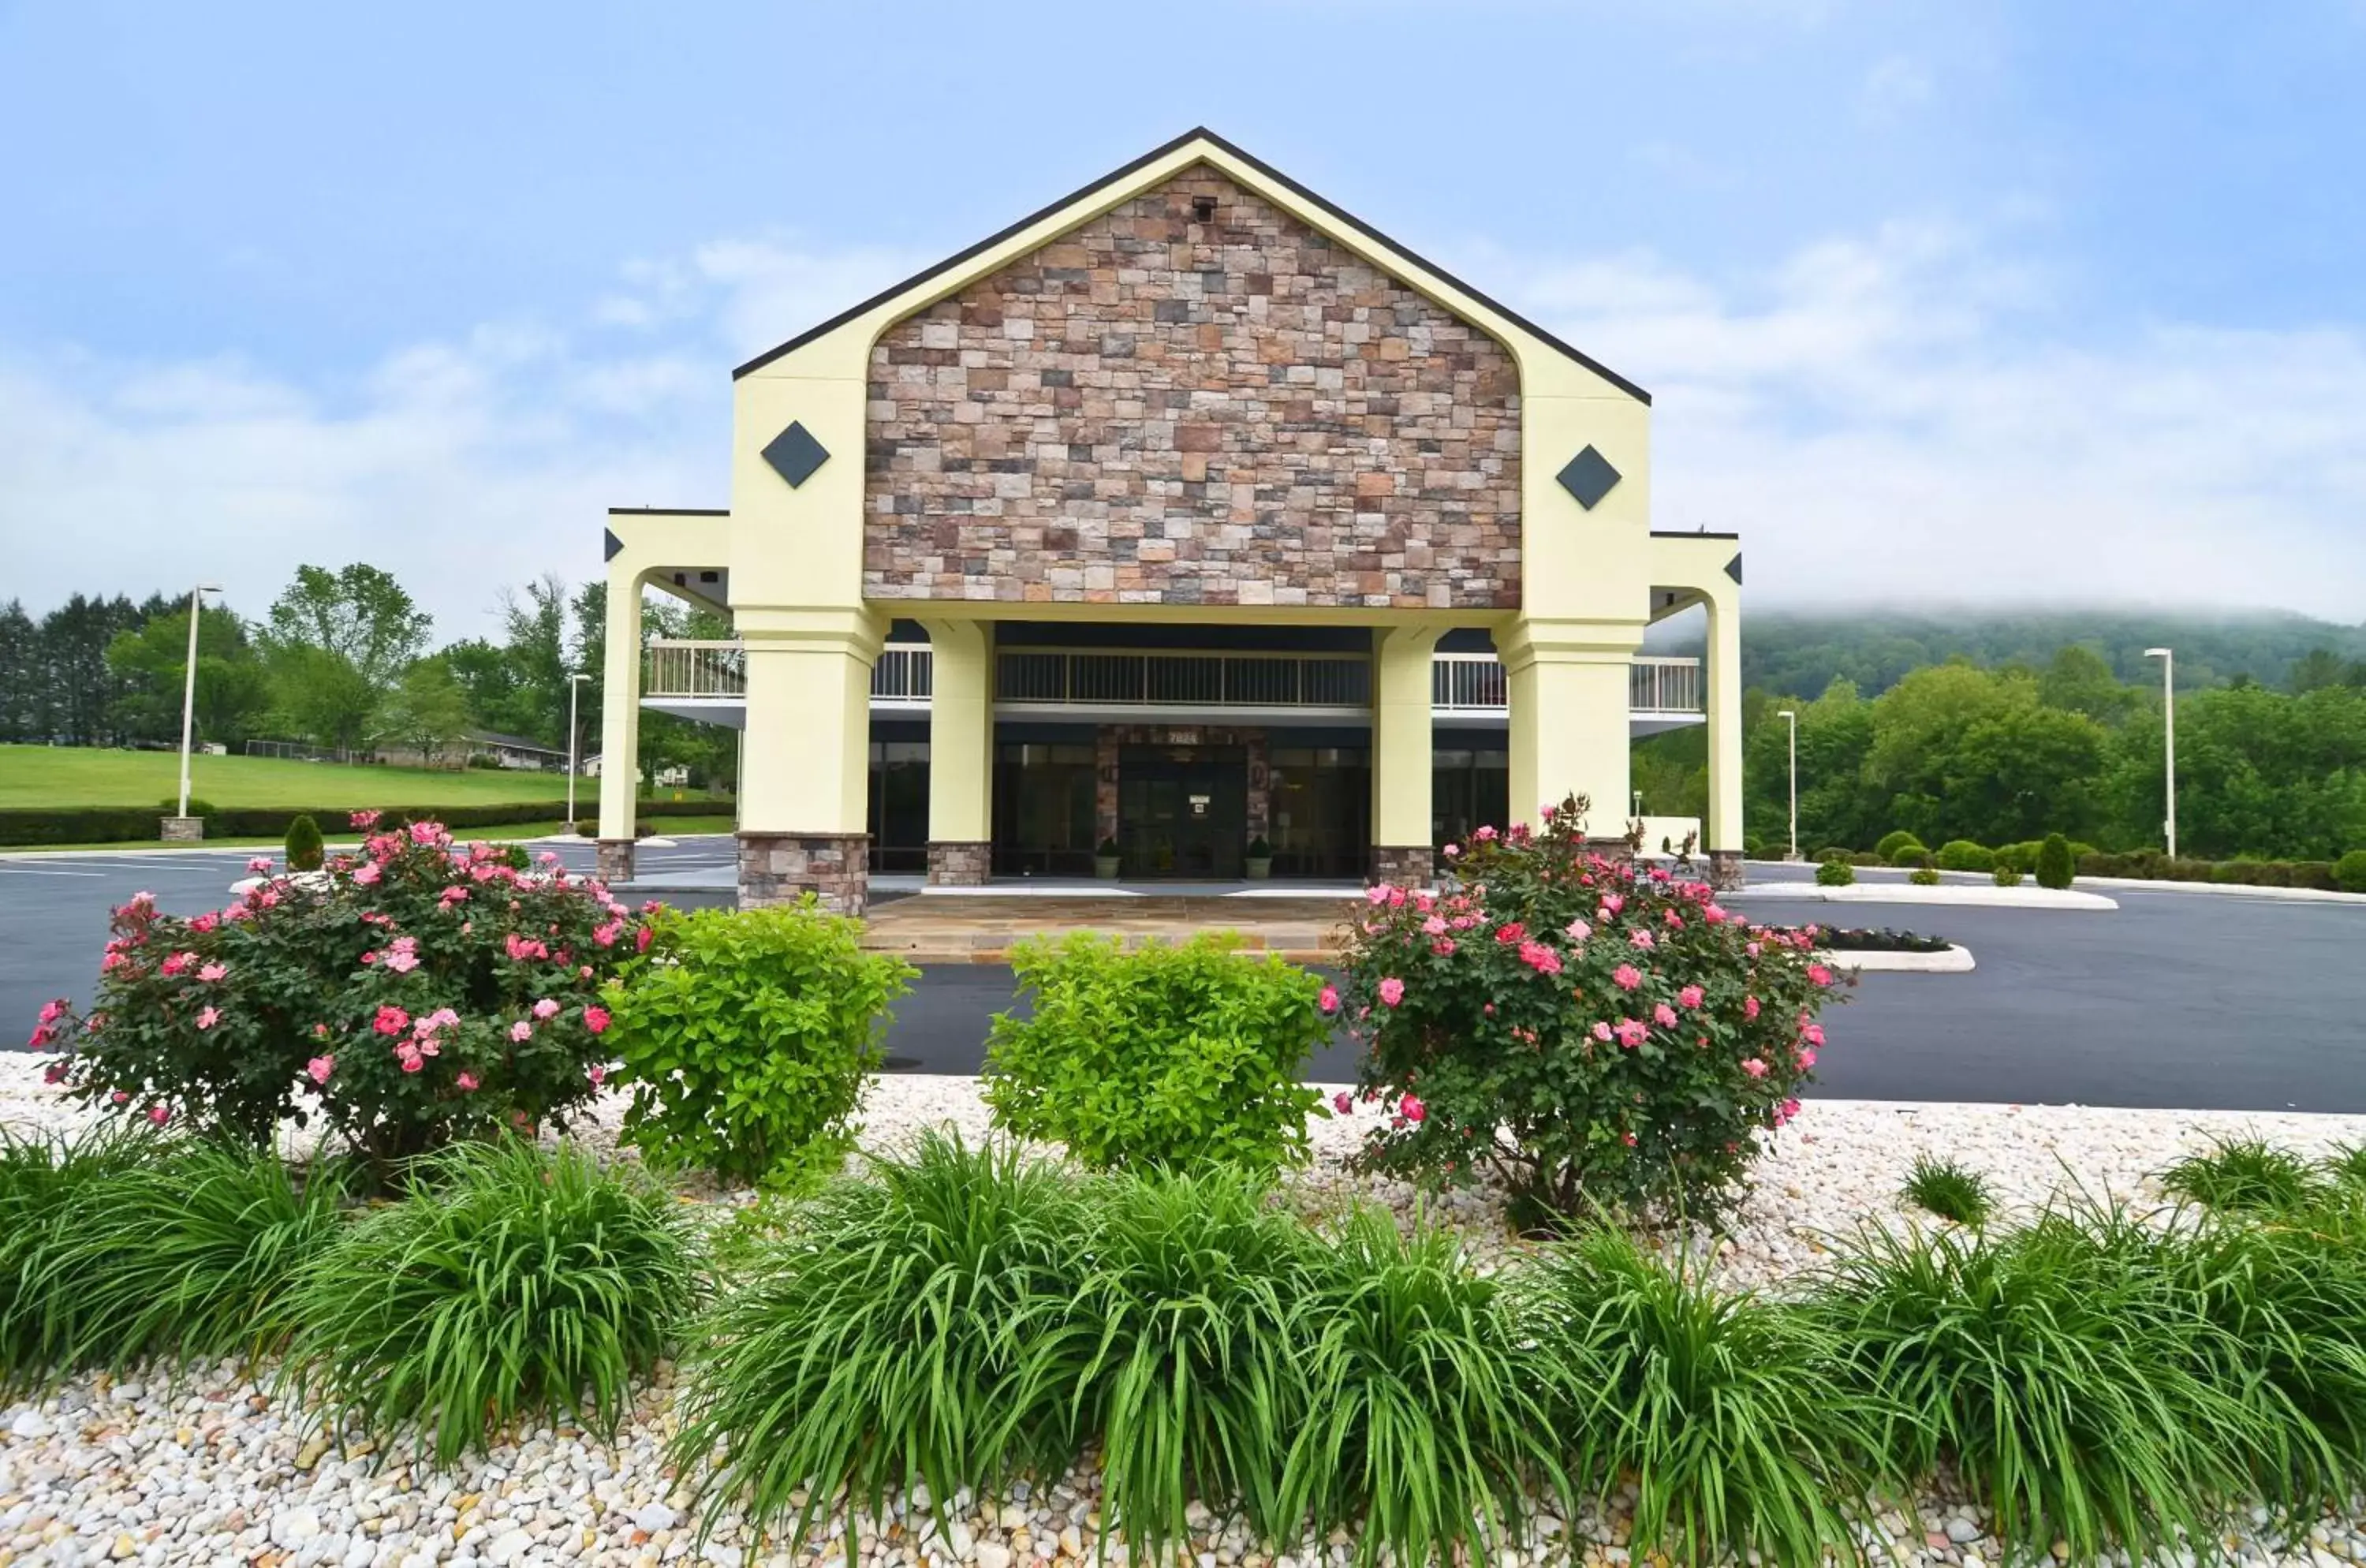 Property building in Best Western Cades Cove Inn